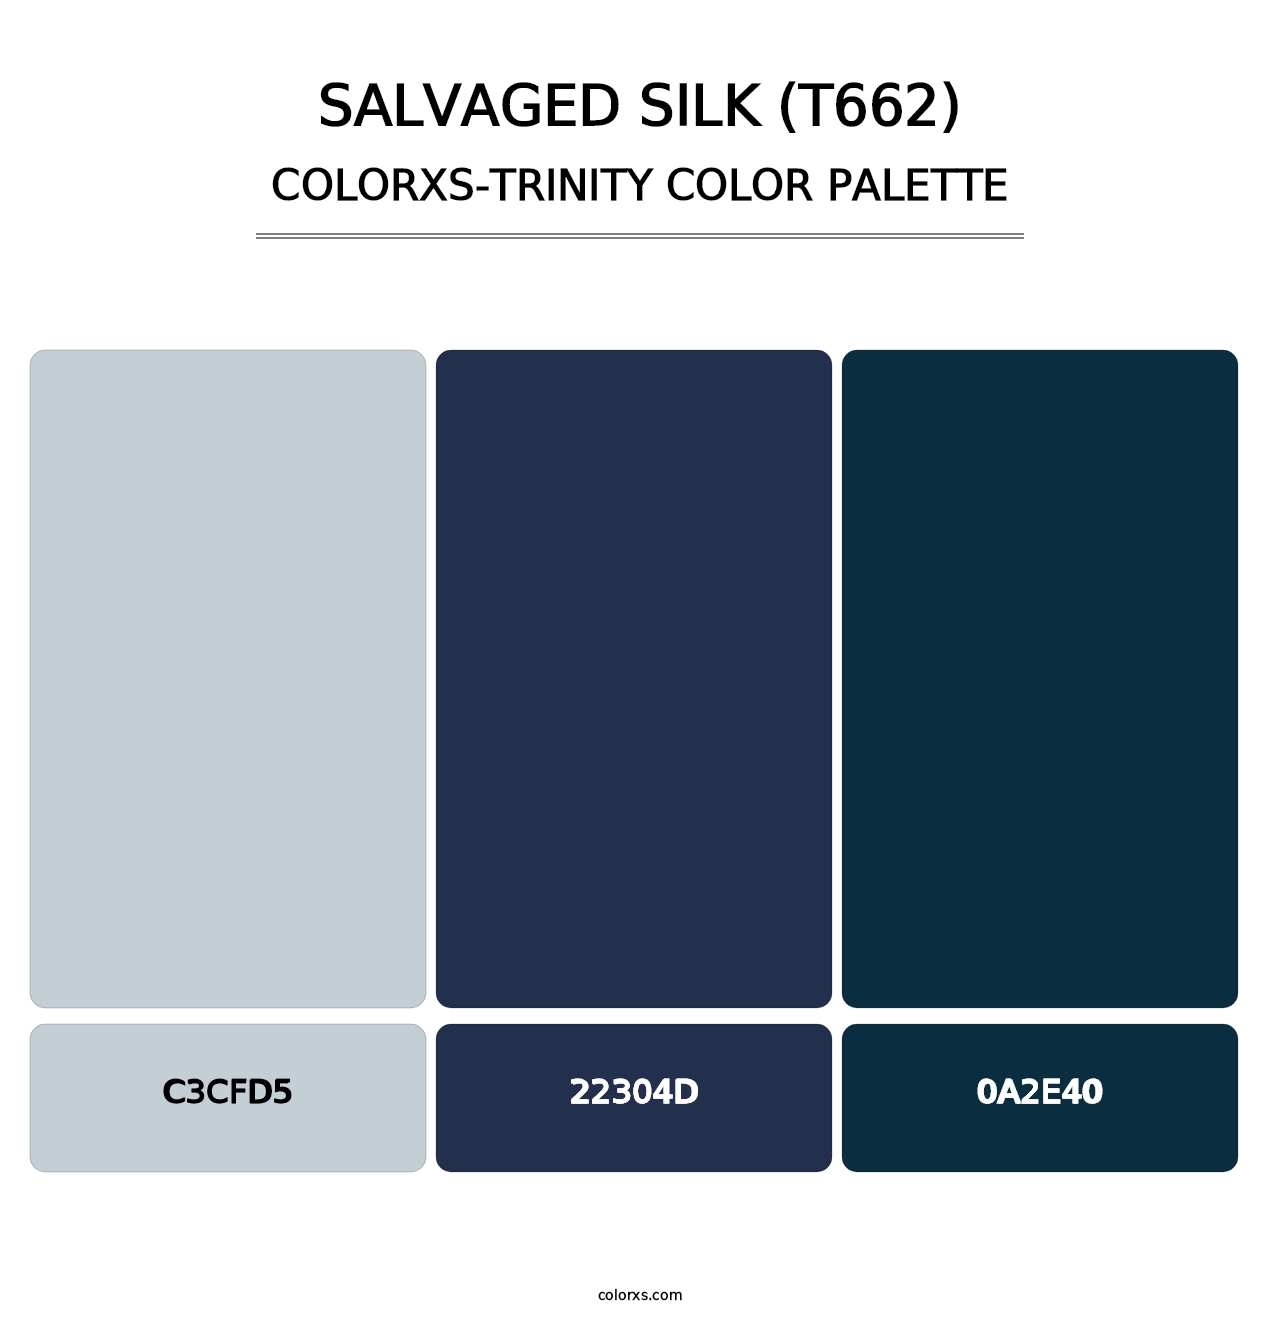 Salvaged Silk (T662) - Colorxs Trinity Palette